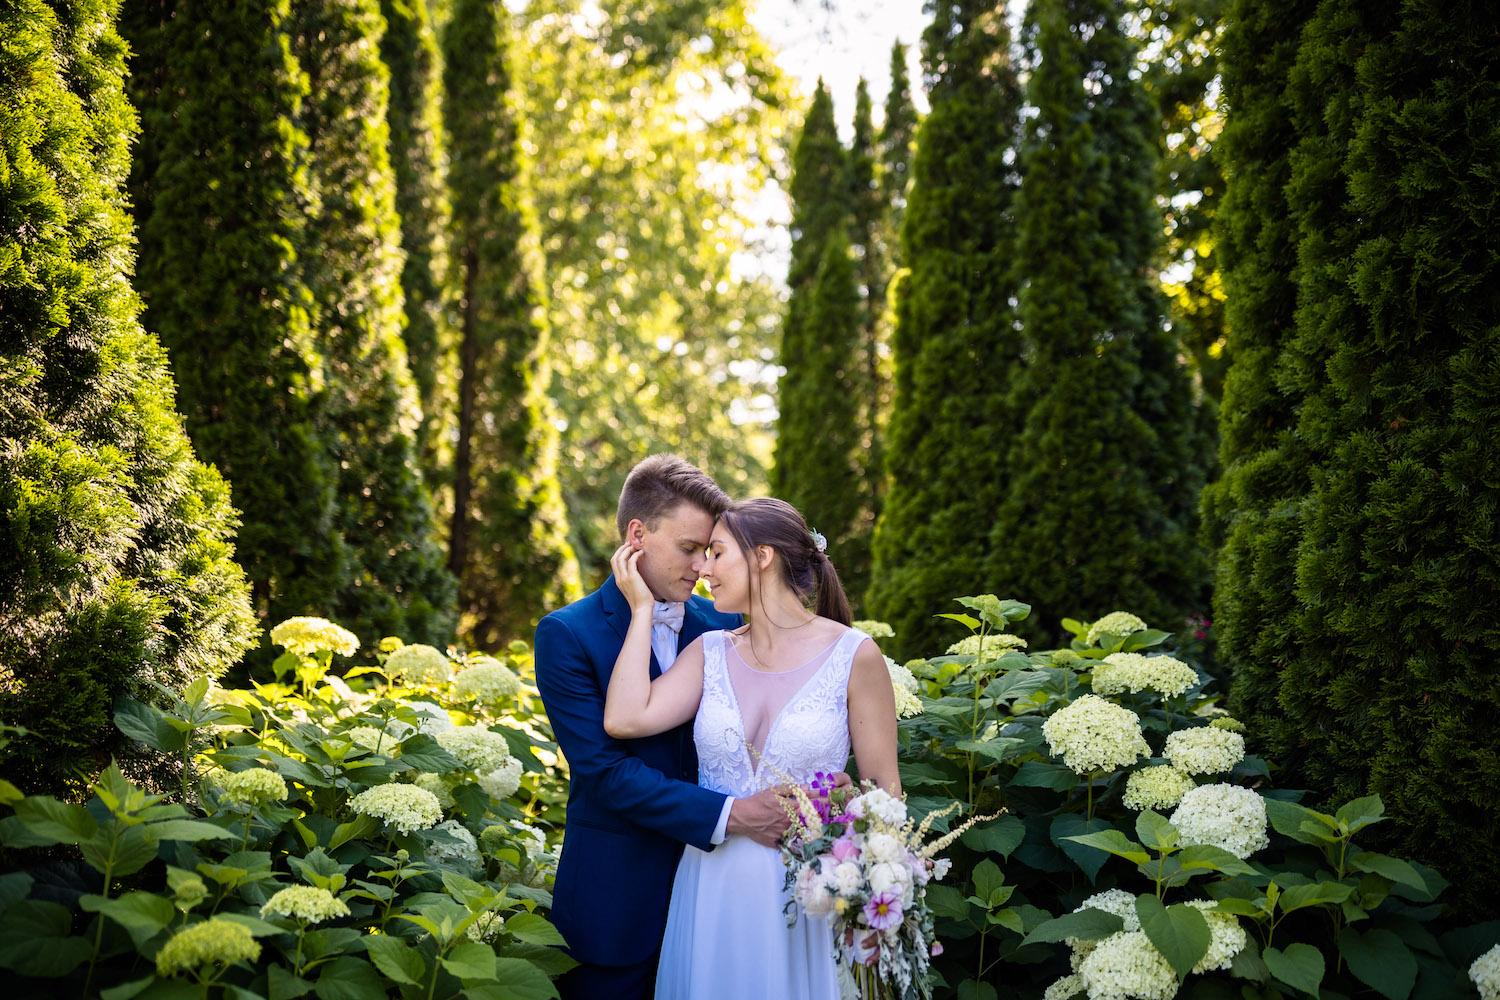 Bride and groom embrace and pose in front of elegant trees in a garden during their fairytale Lake Morey Resort wedding in Vermont by Makayla McGarvey